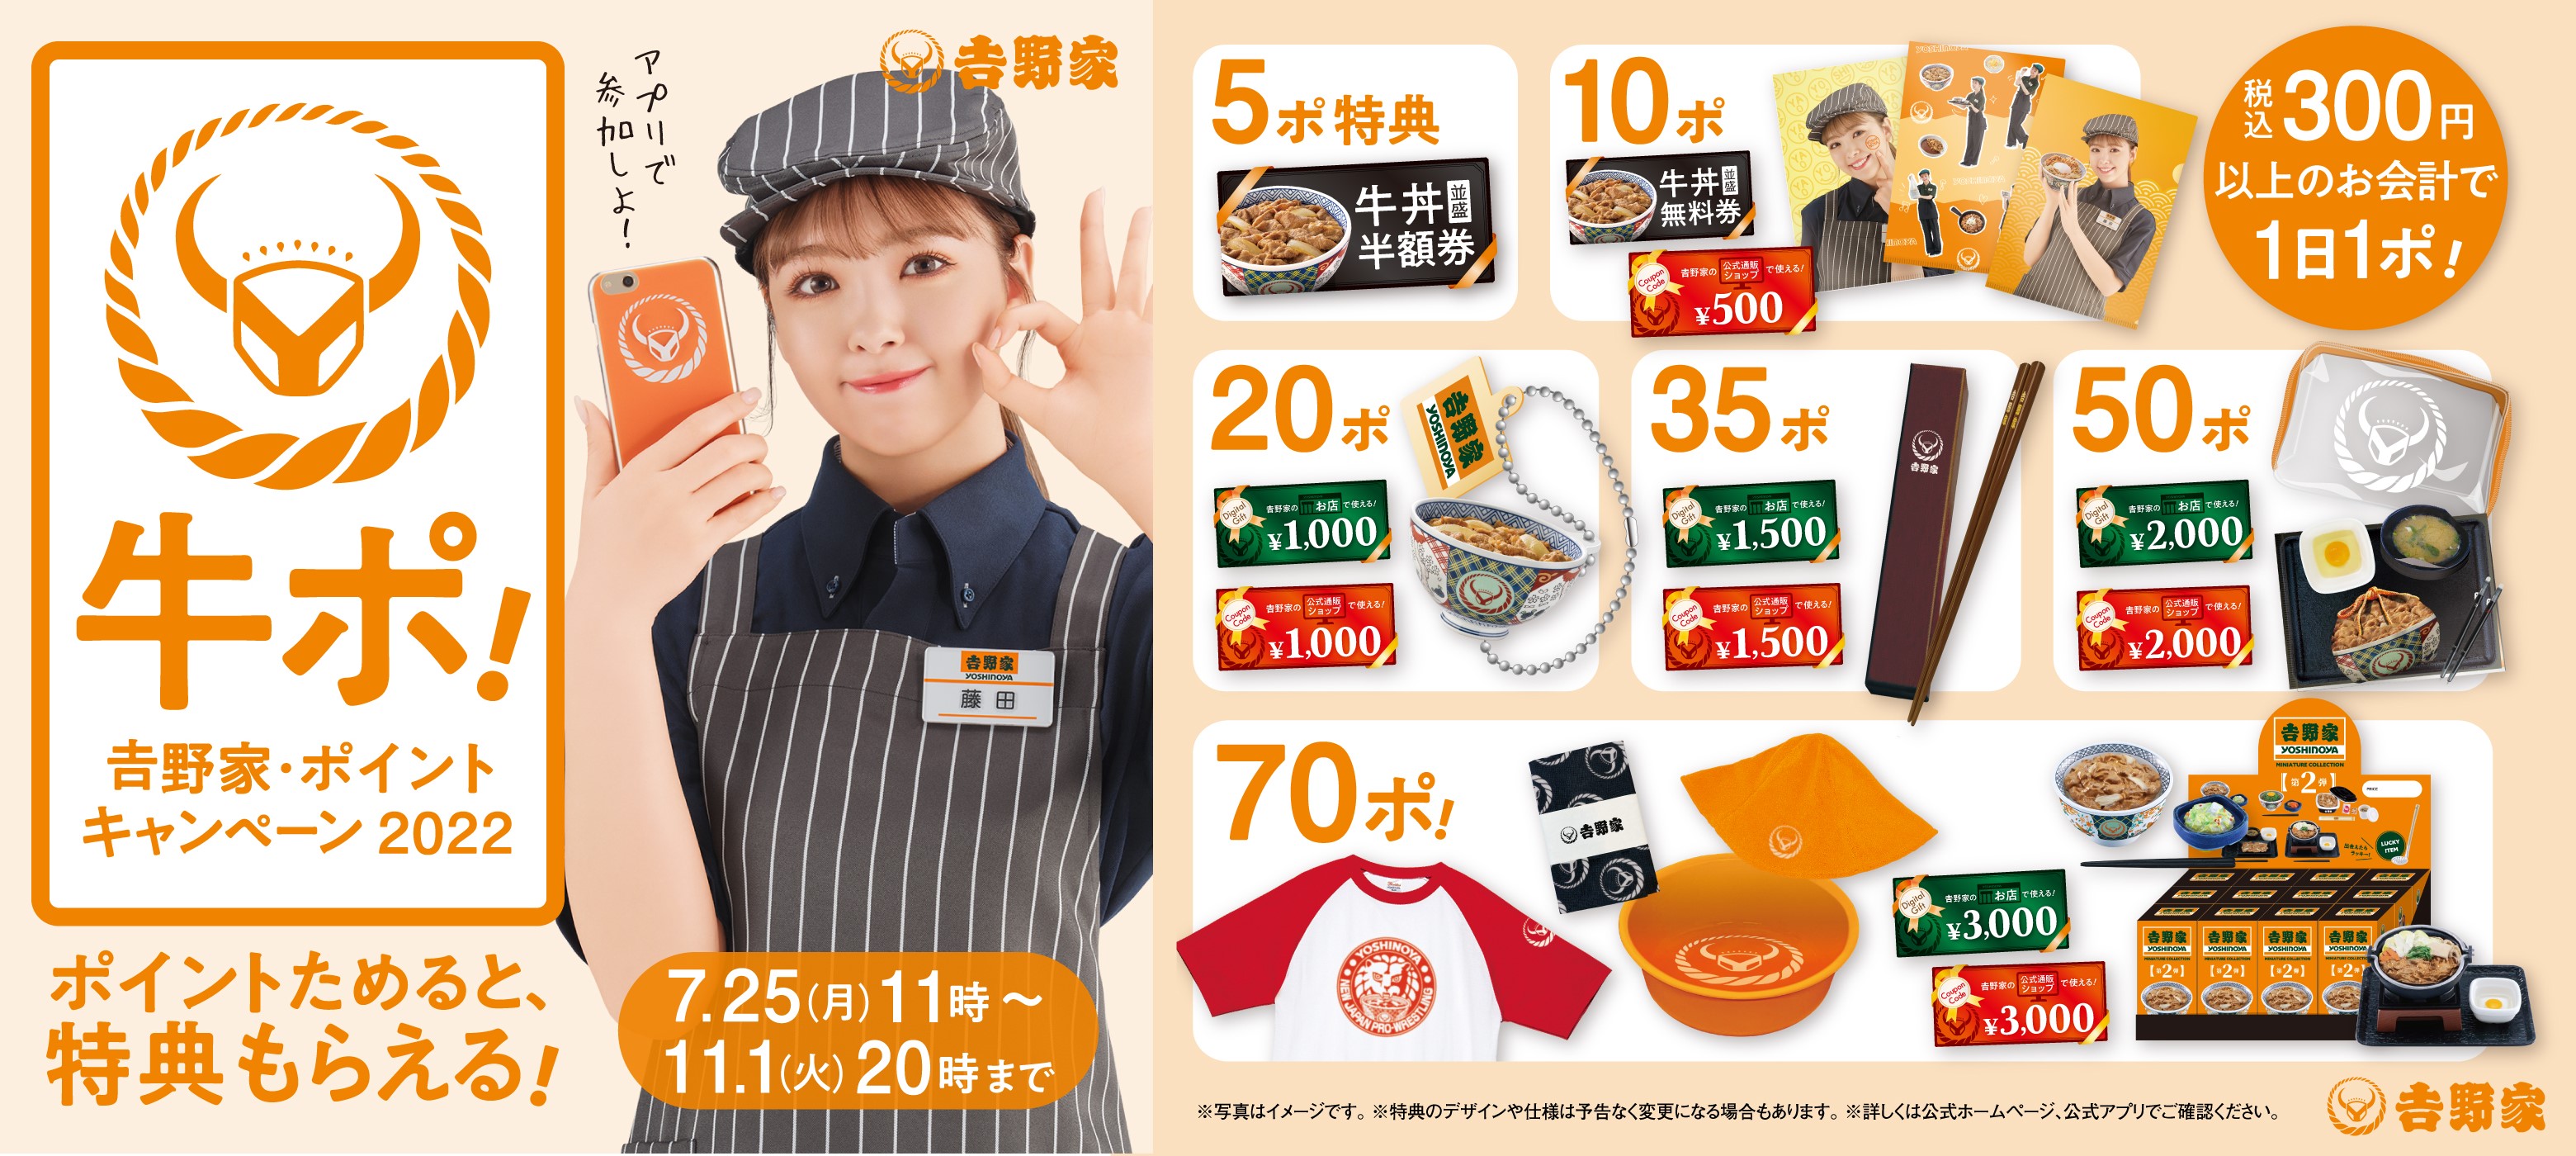 Yoshinoya giving away free swag through new point campaign but you may